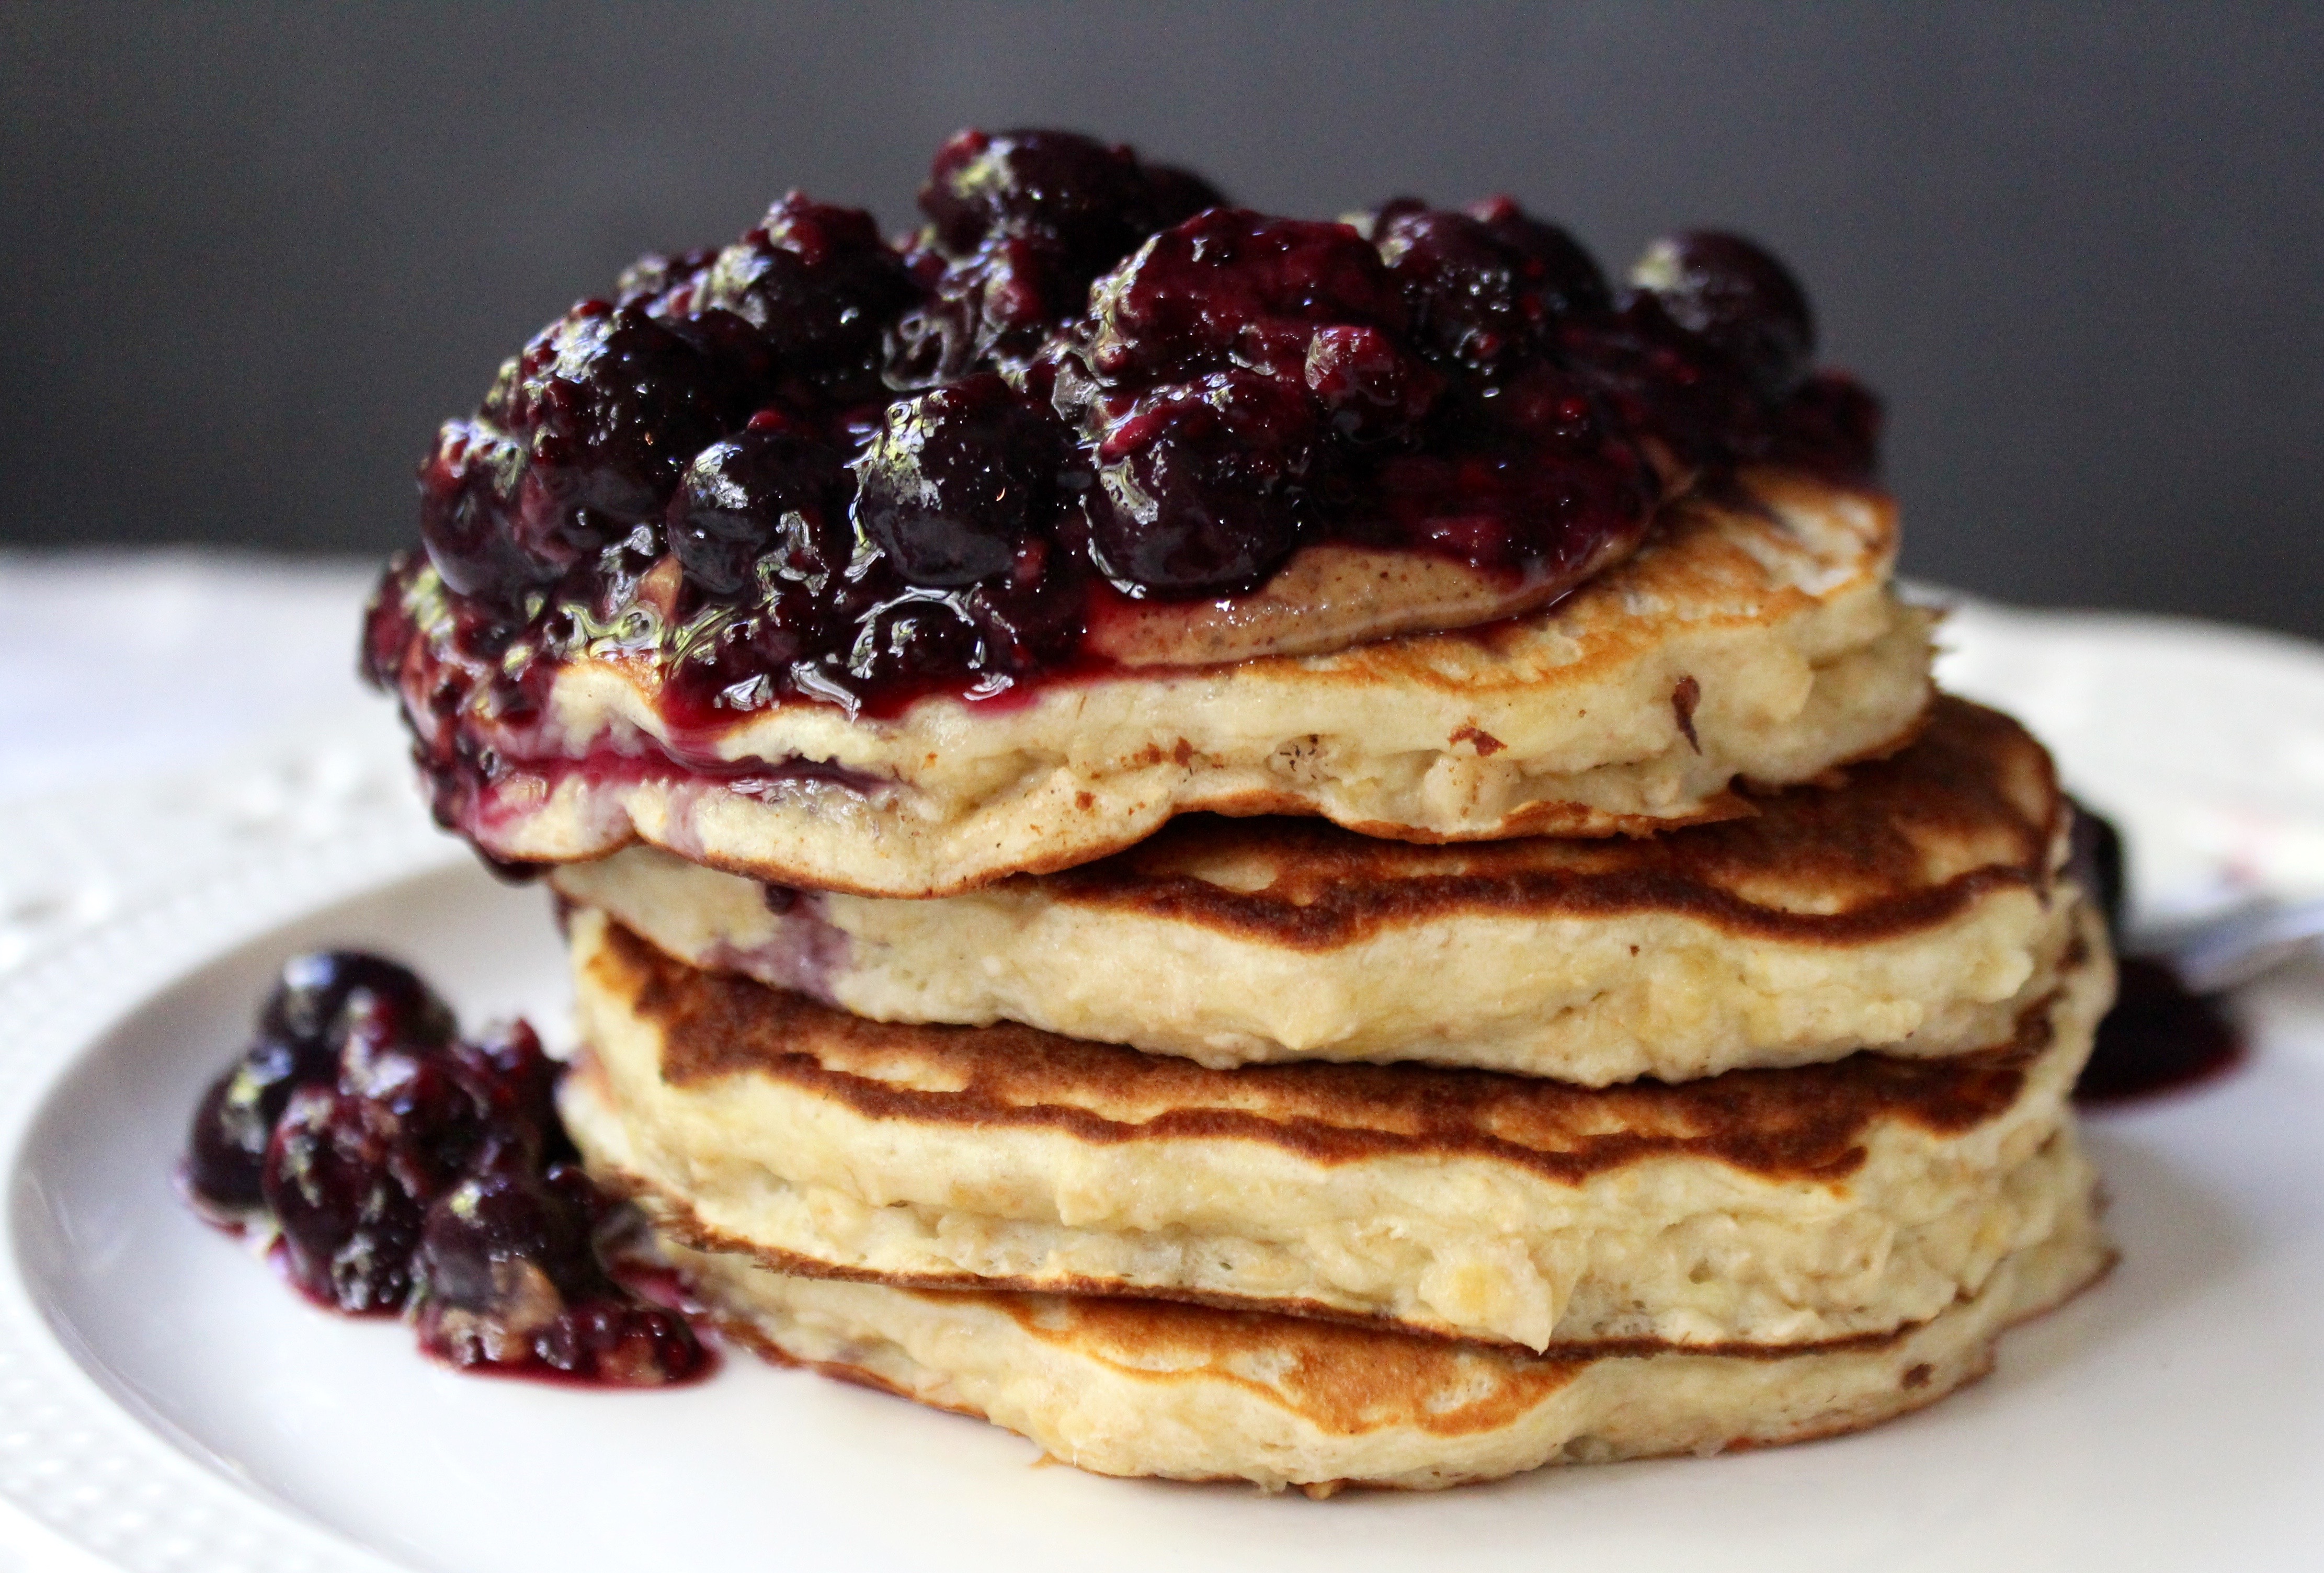 Banana Oatmeal Pancakes with Mixed Berry Compote